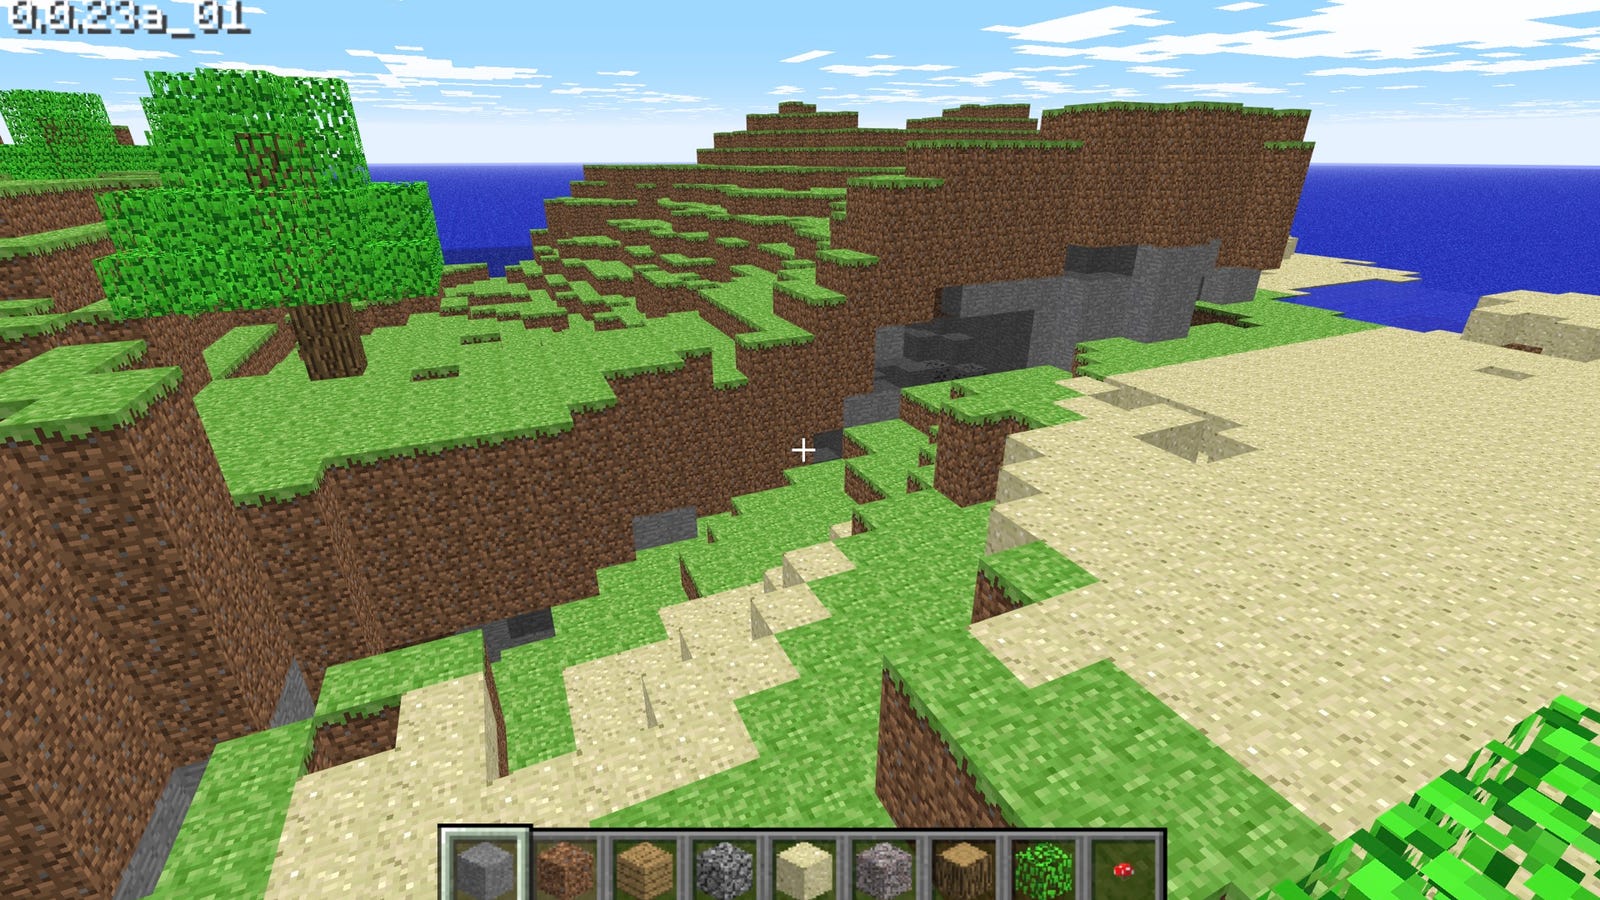 You can now play 2009 Classic Minecraft on your browser for free